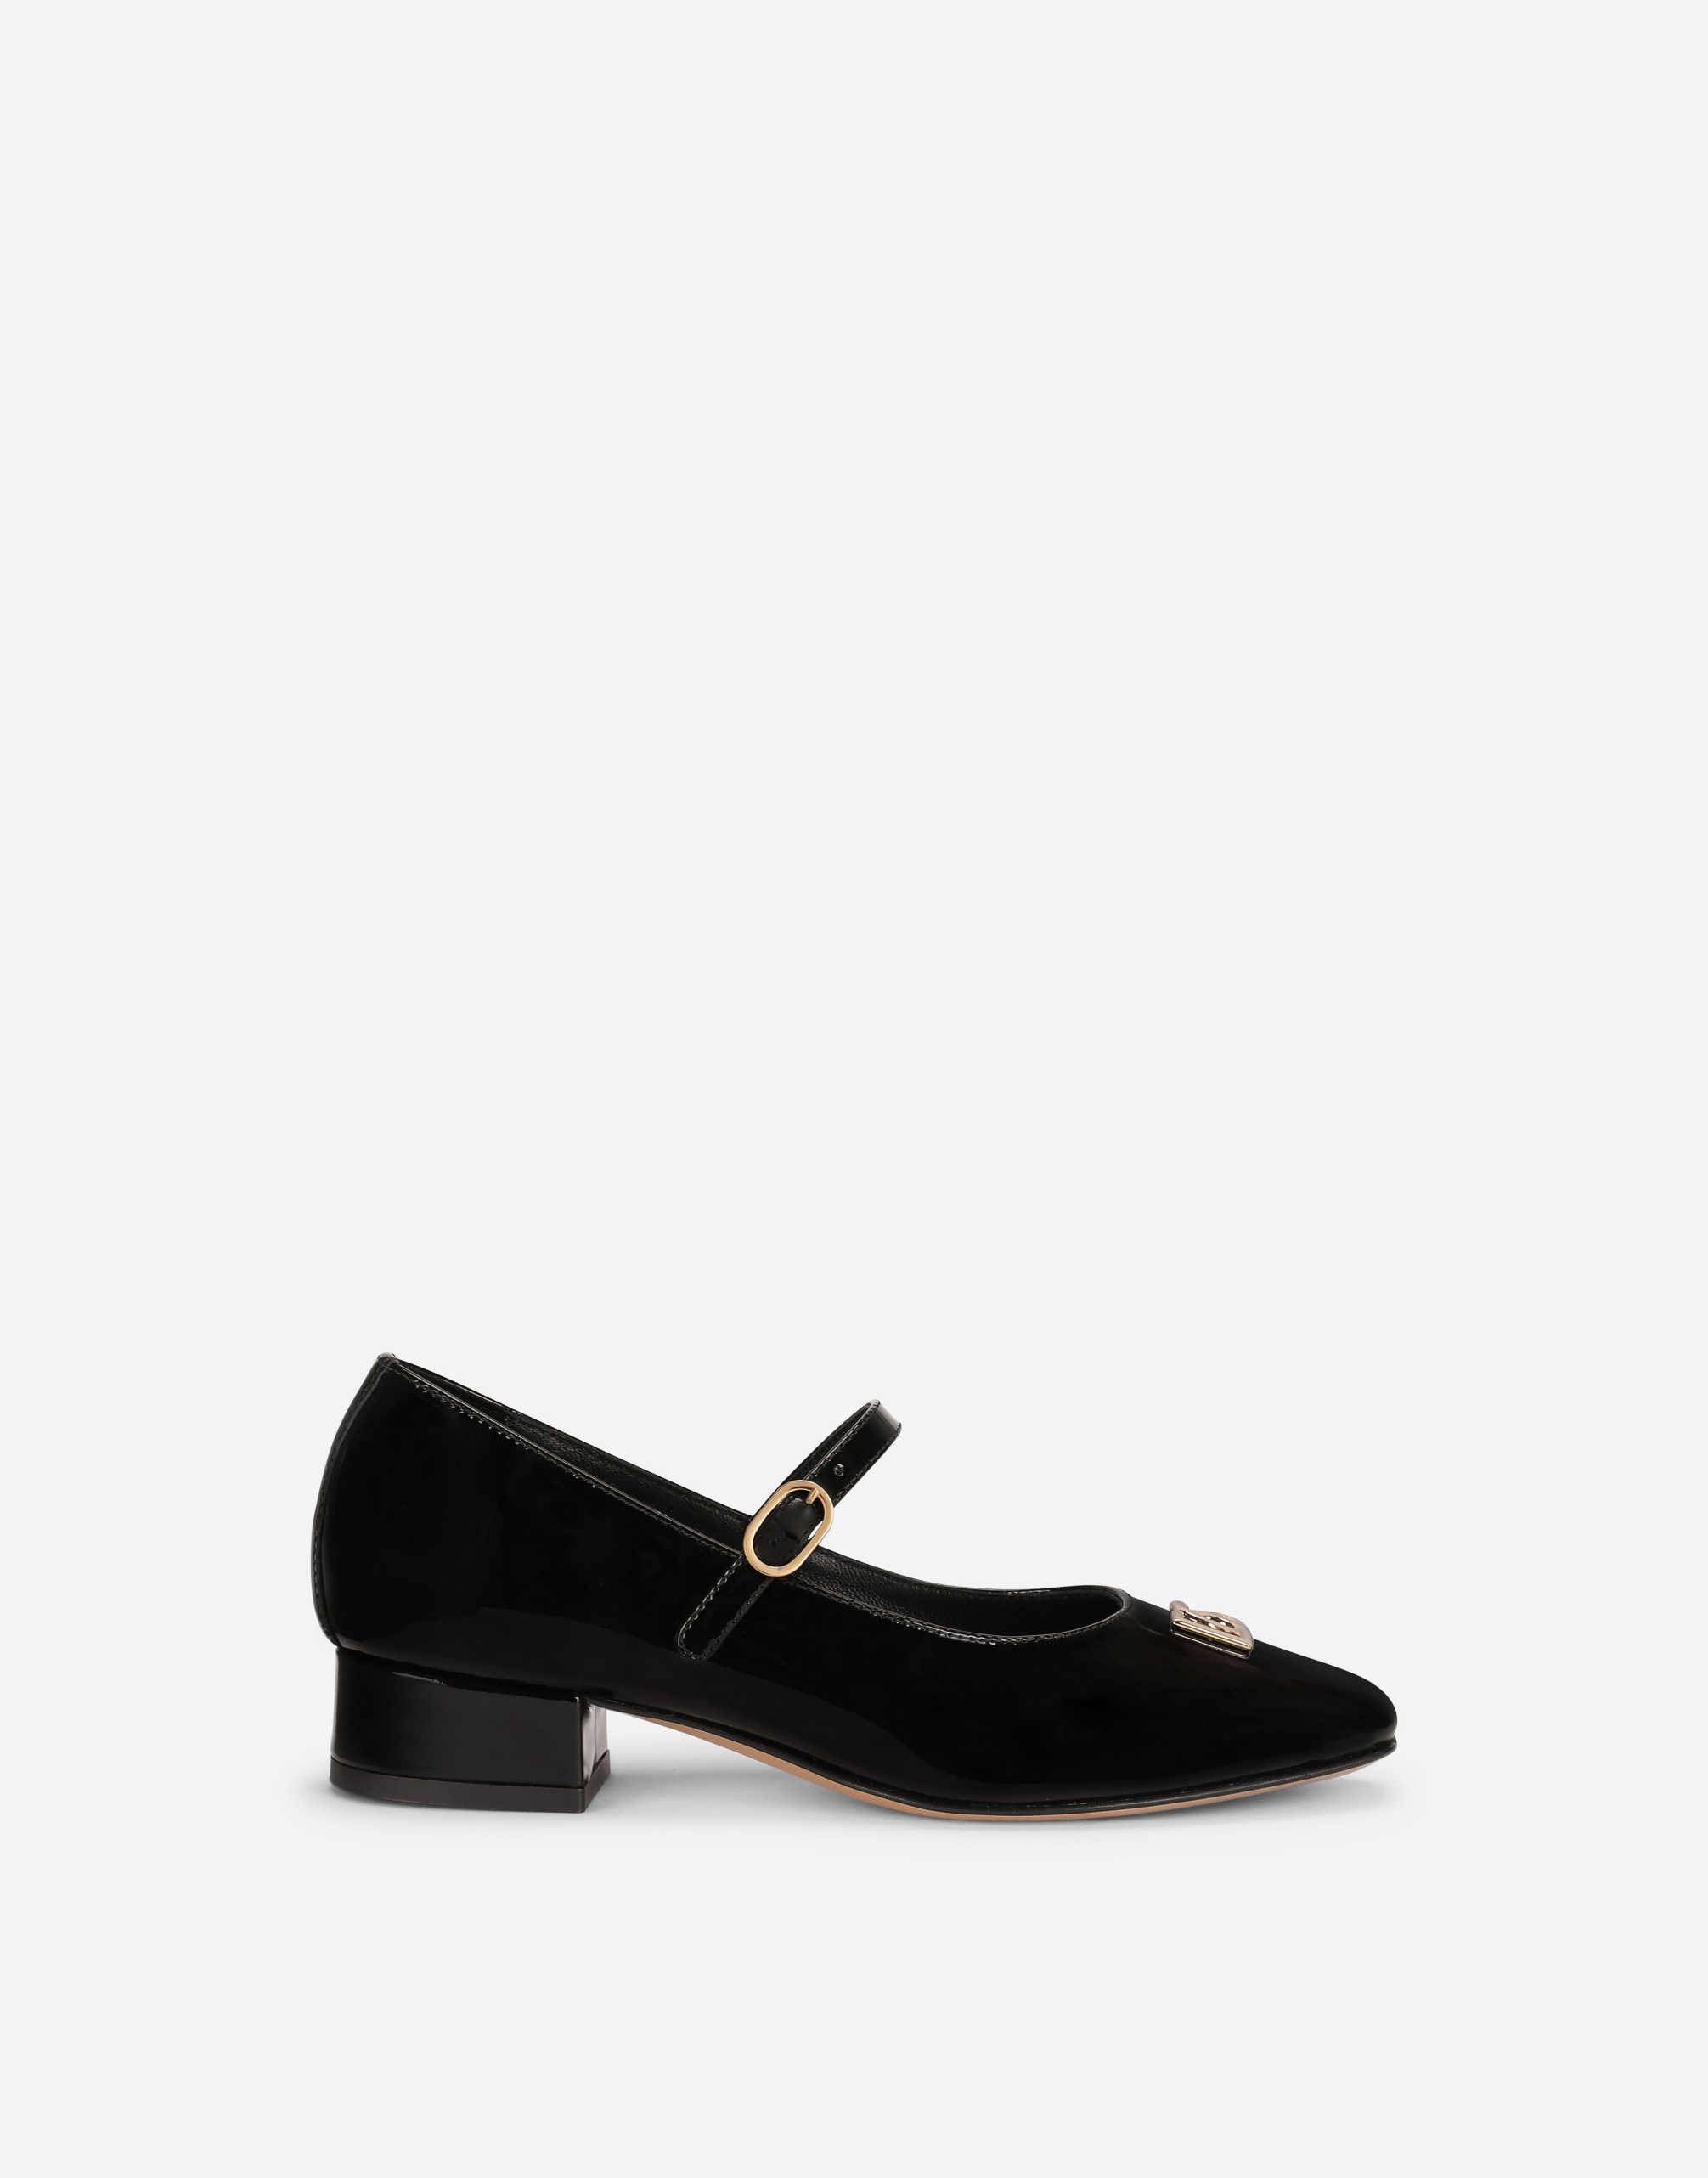 Patent leather ballet flats with heel in Black